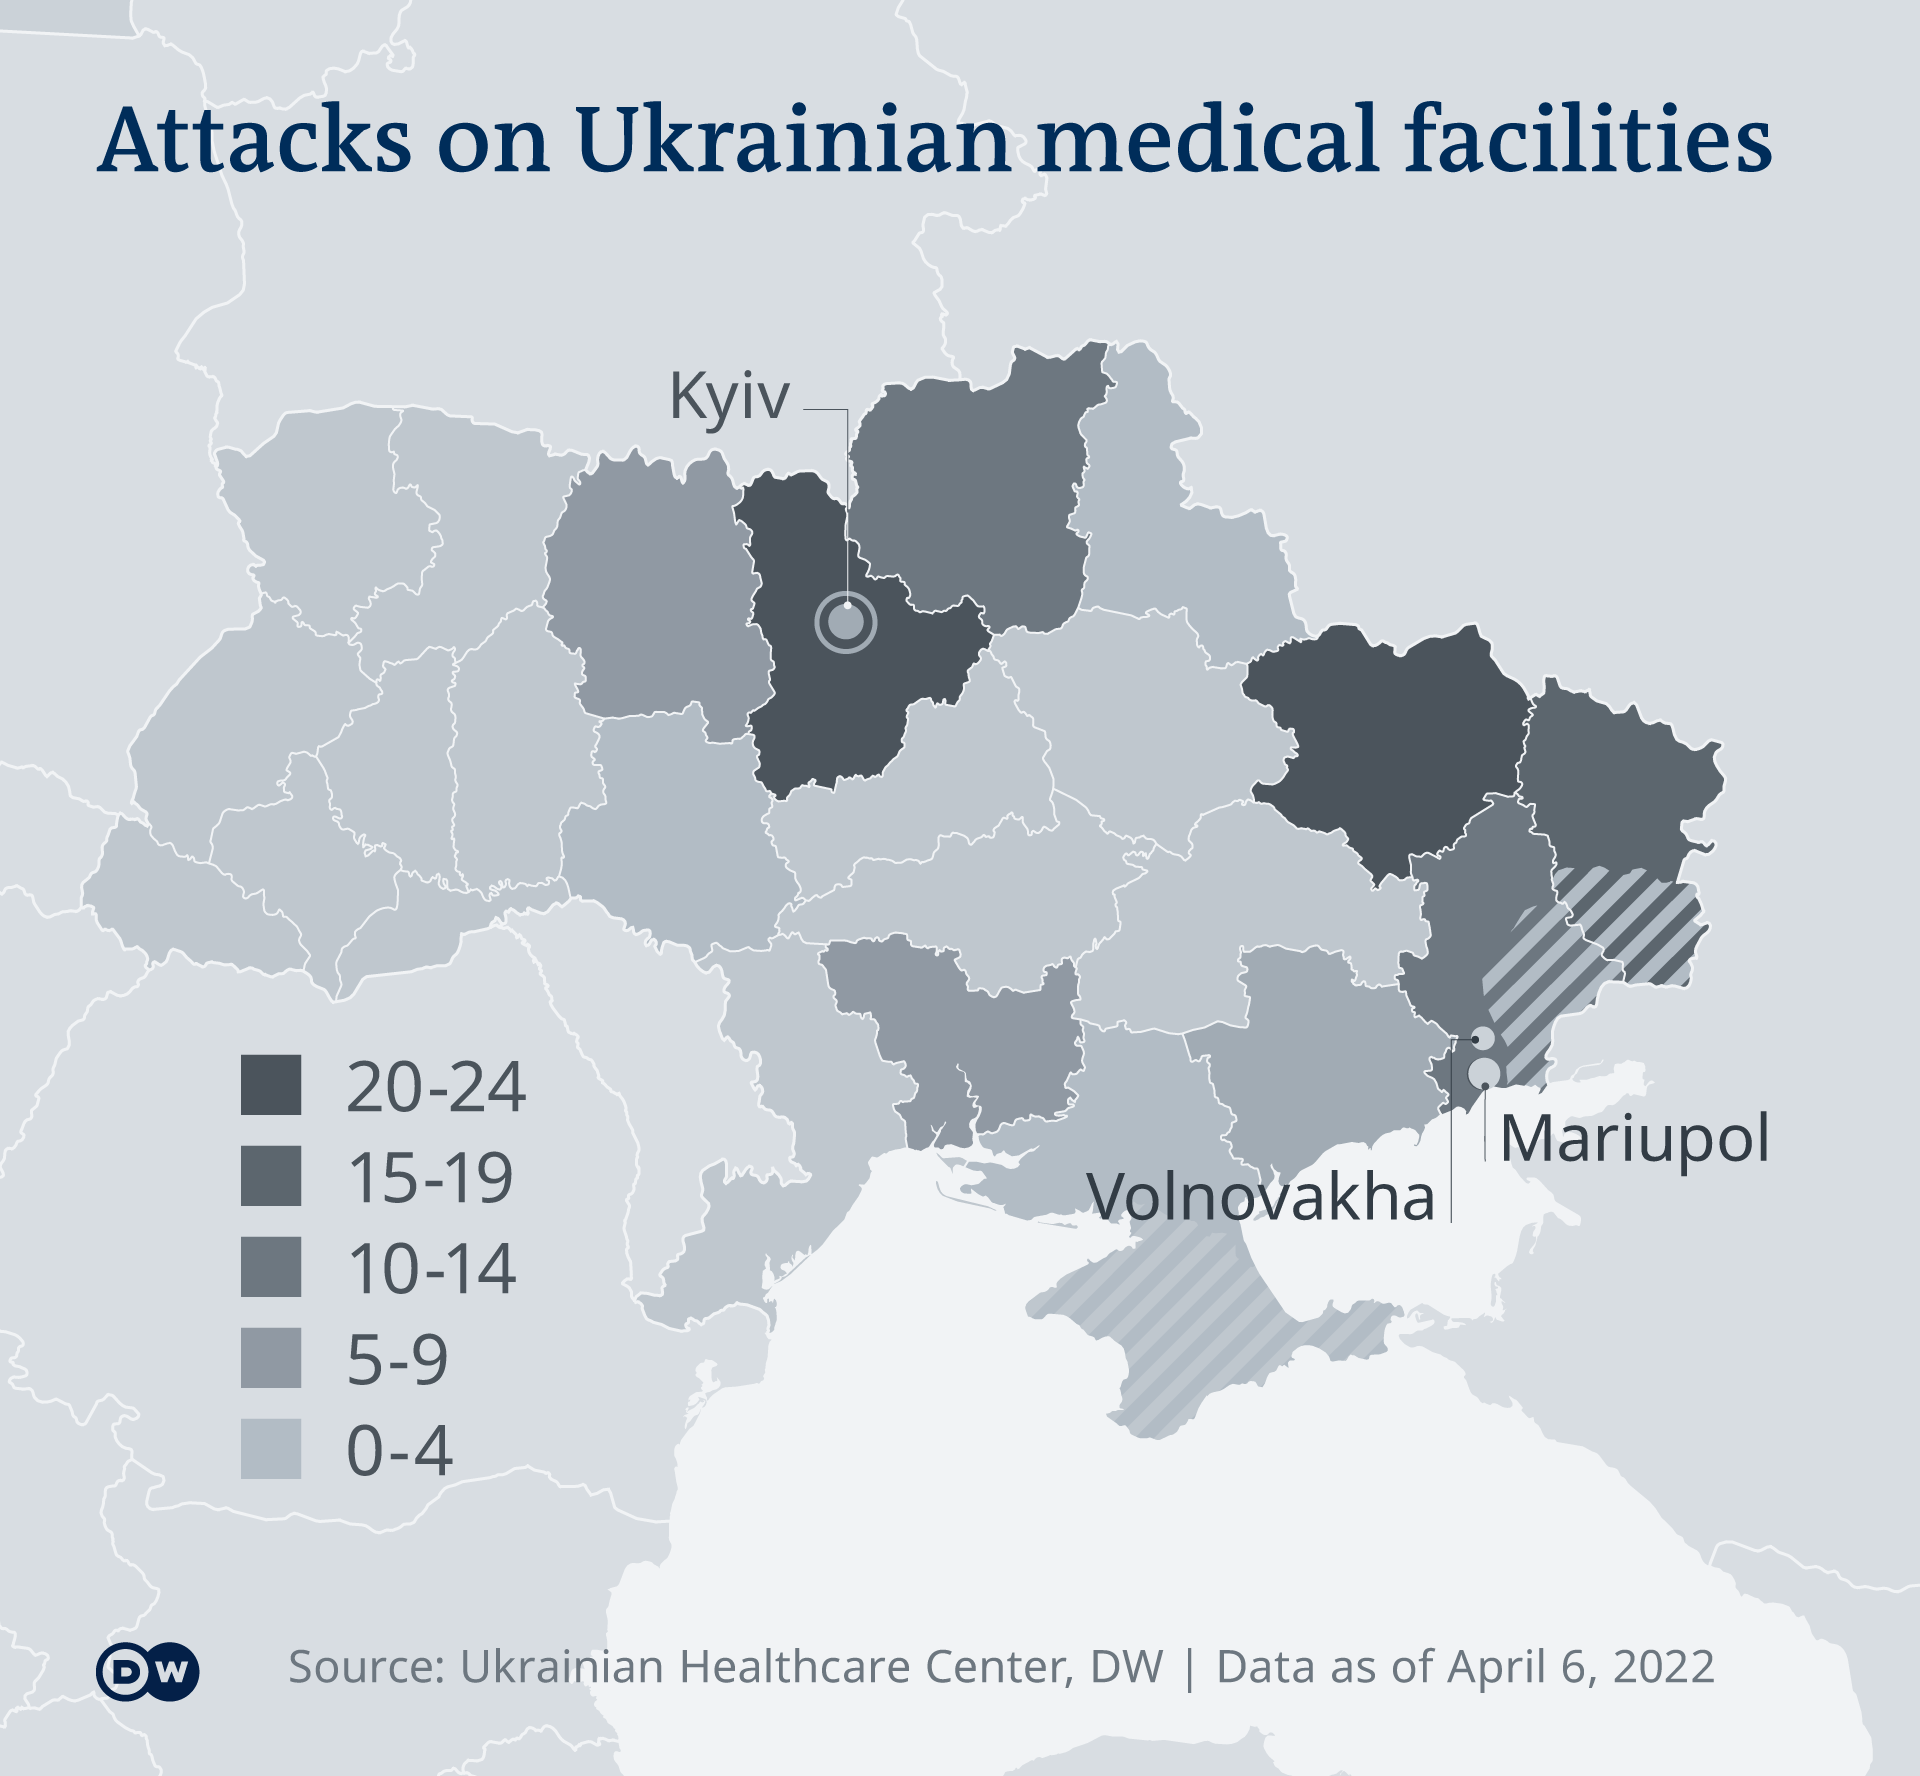 Map showing attacks on hospitals in Ukraine by region